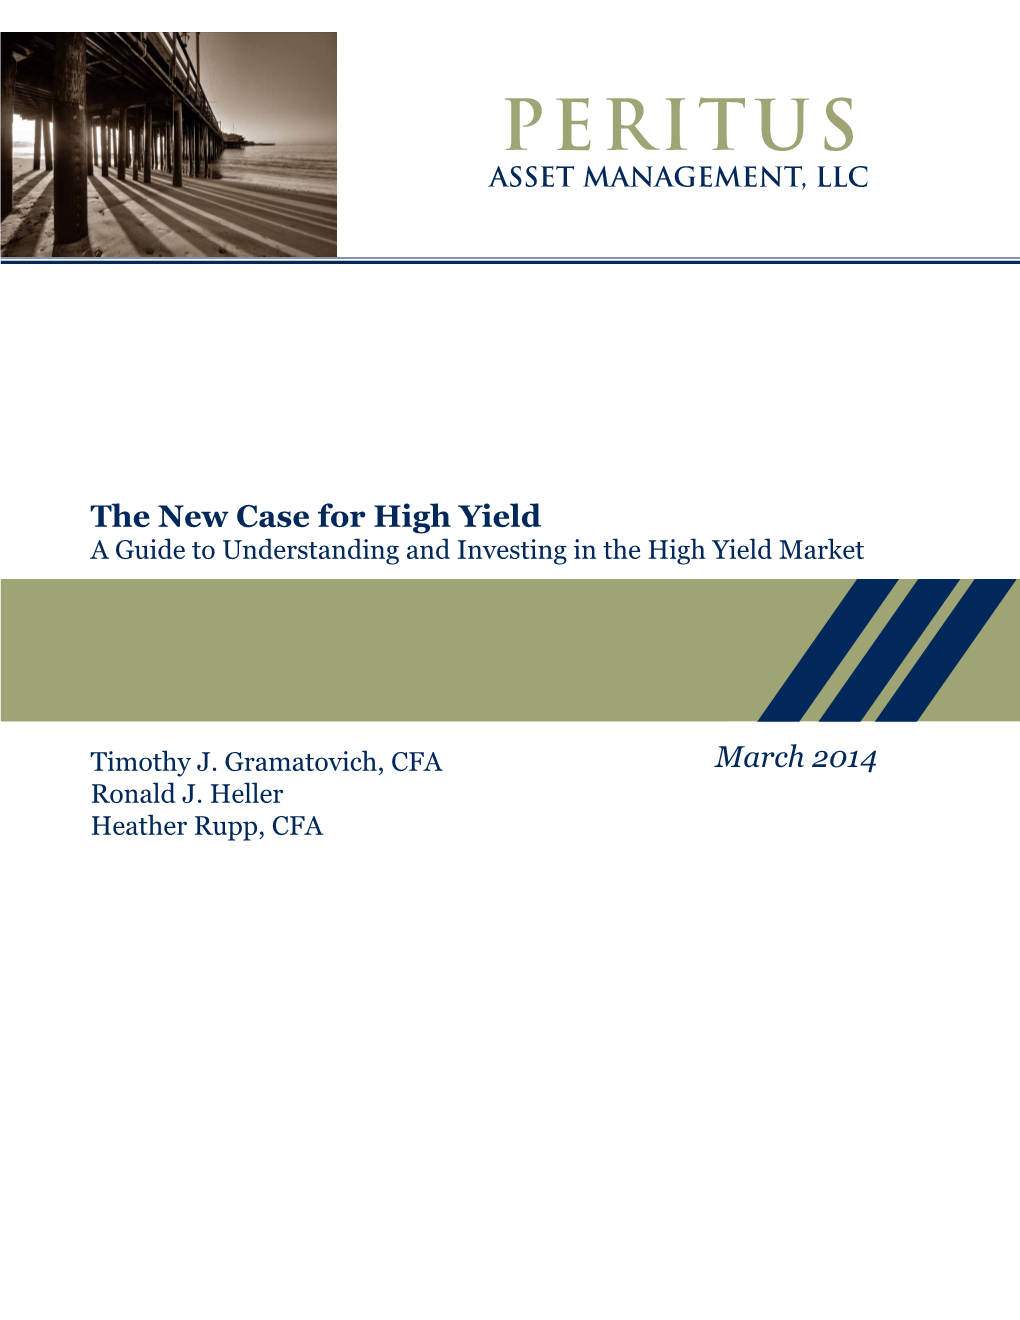 The New Case for High Yield a Guide to Understanding and Investing in the High Yield Market